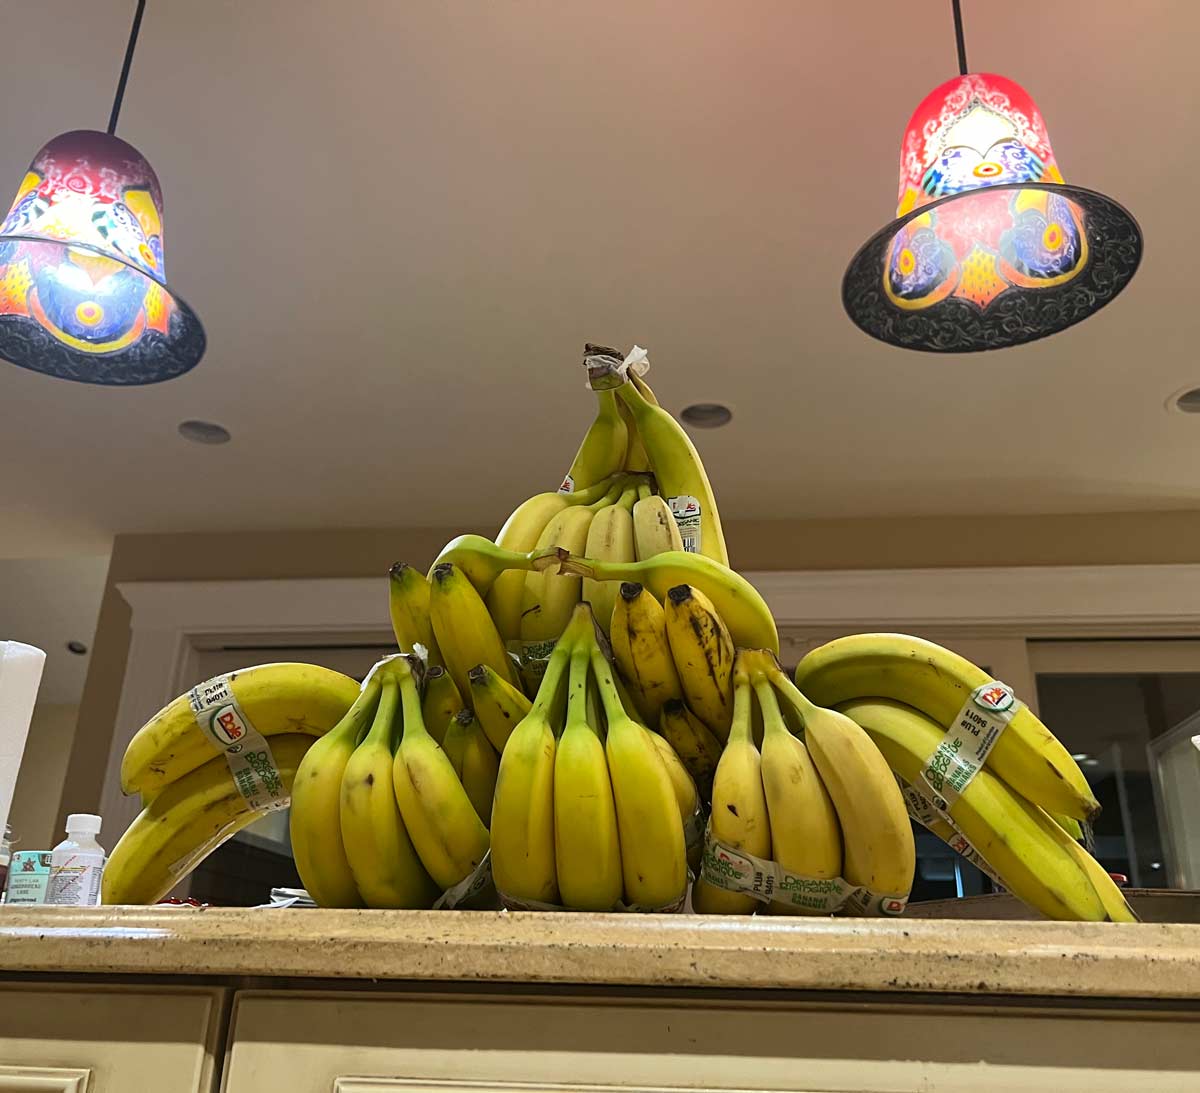 Wife accidentally ordered 9 bunches of bananas. Naturally, my young son saw an opportunity to make a Crab Banana sculpture... Behold, THE CRABANANA!